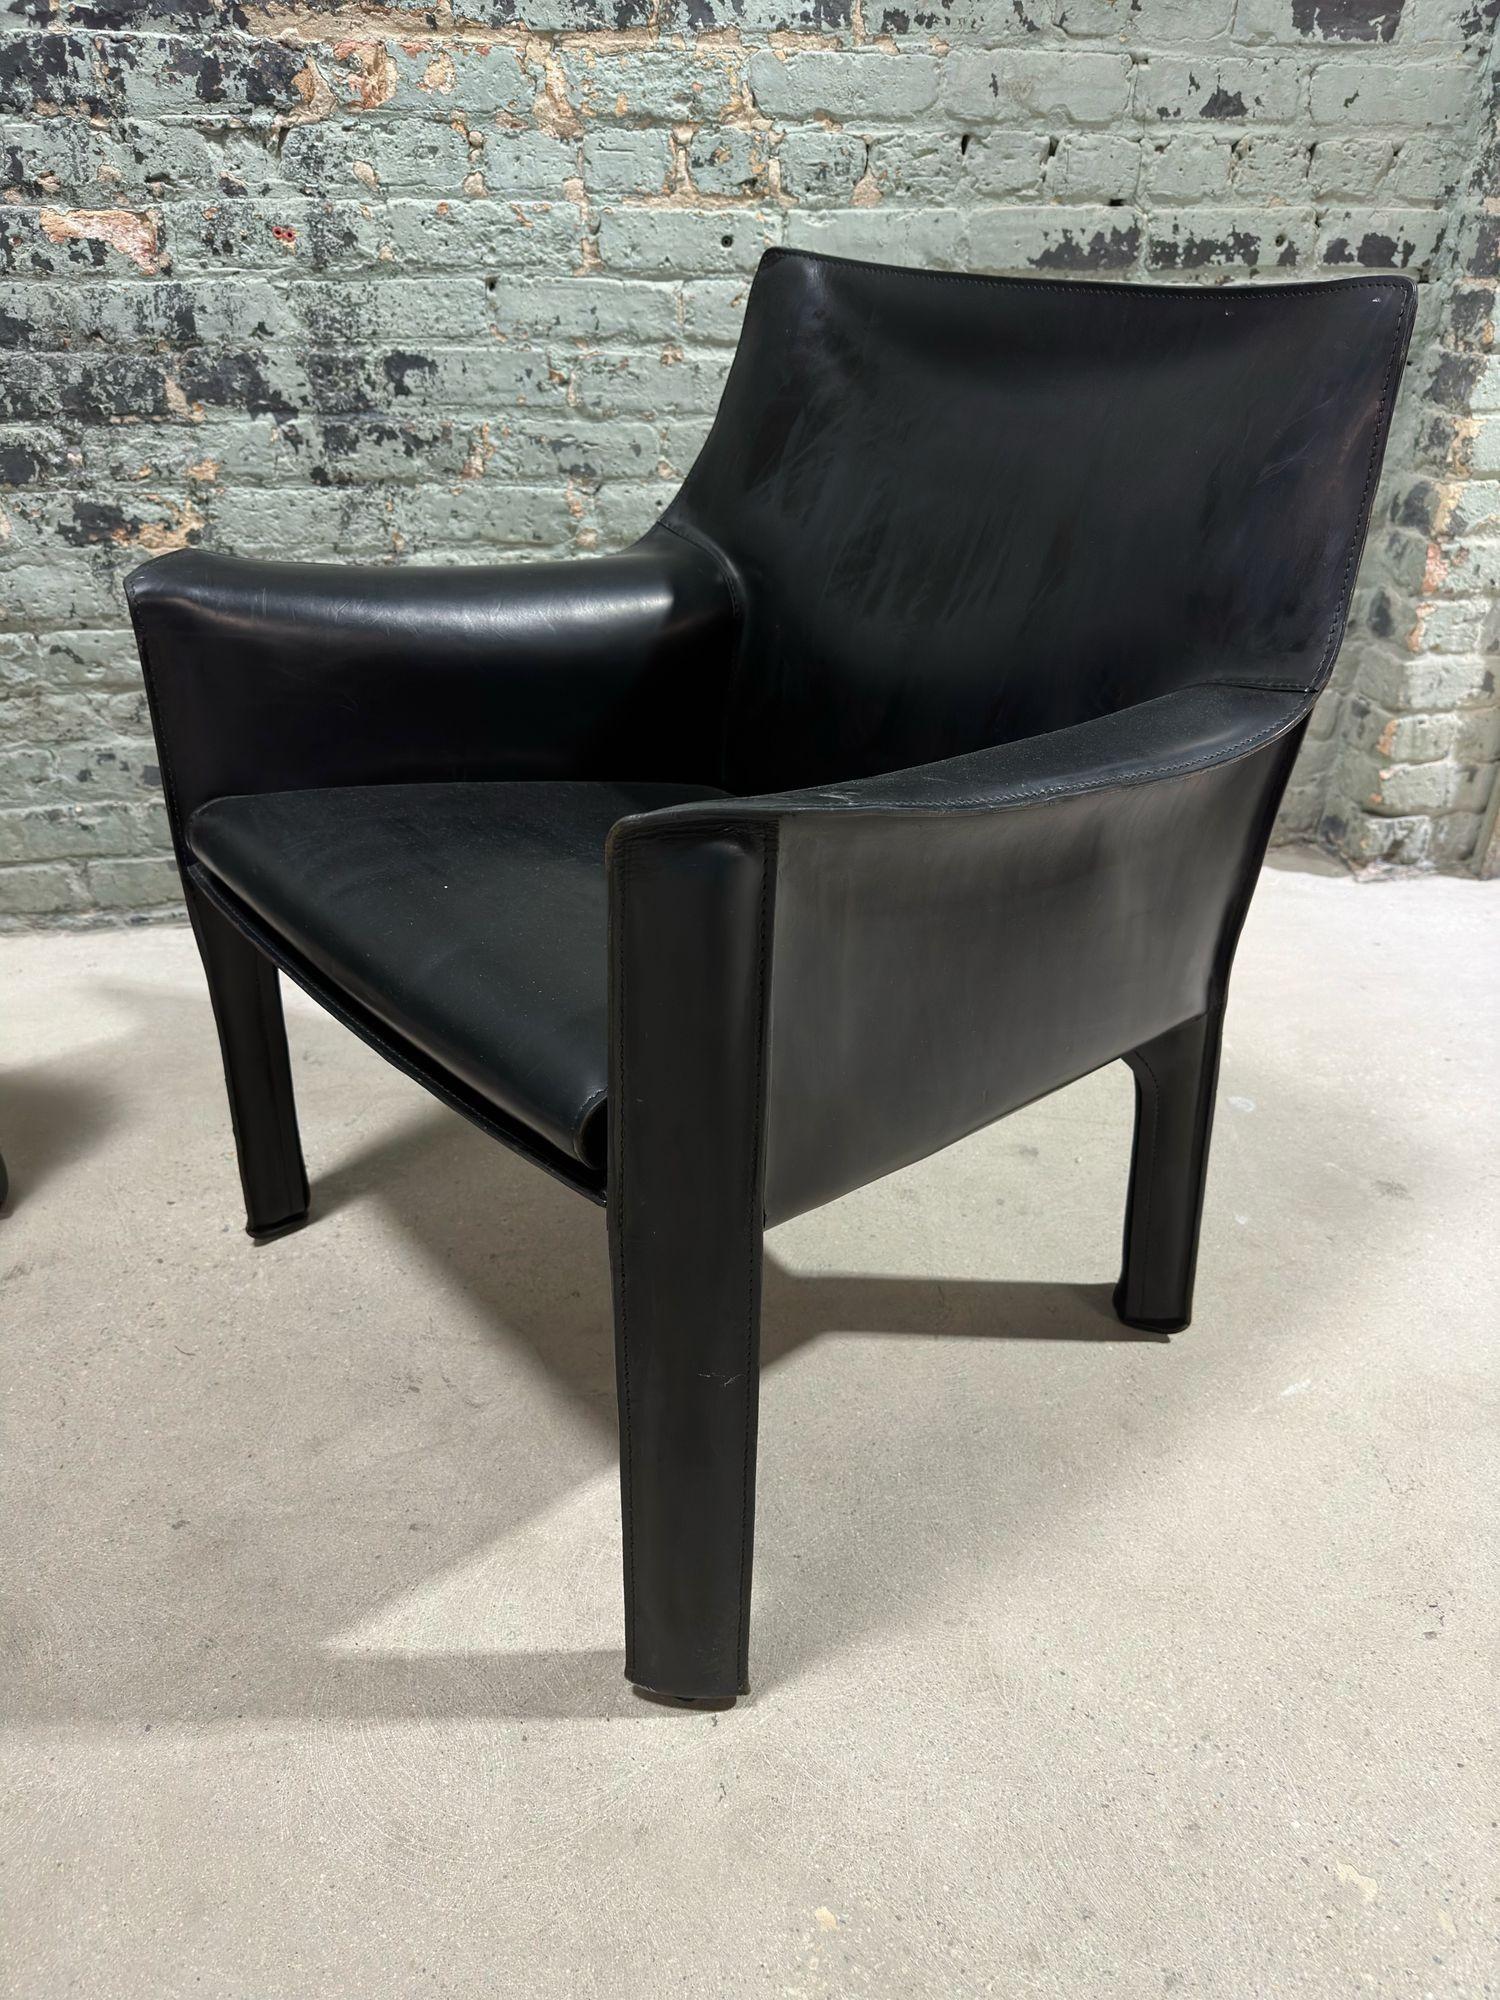 Pair Mario Bellini Black Leather Cab Chairs, Model 414 for Cassina Italy, 1980 In Good Condition For Sale In Chicago, IL